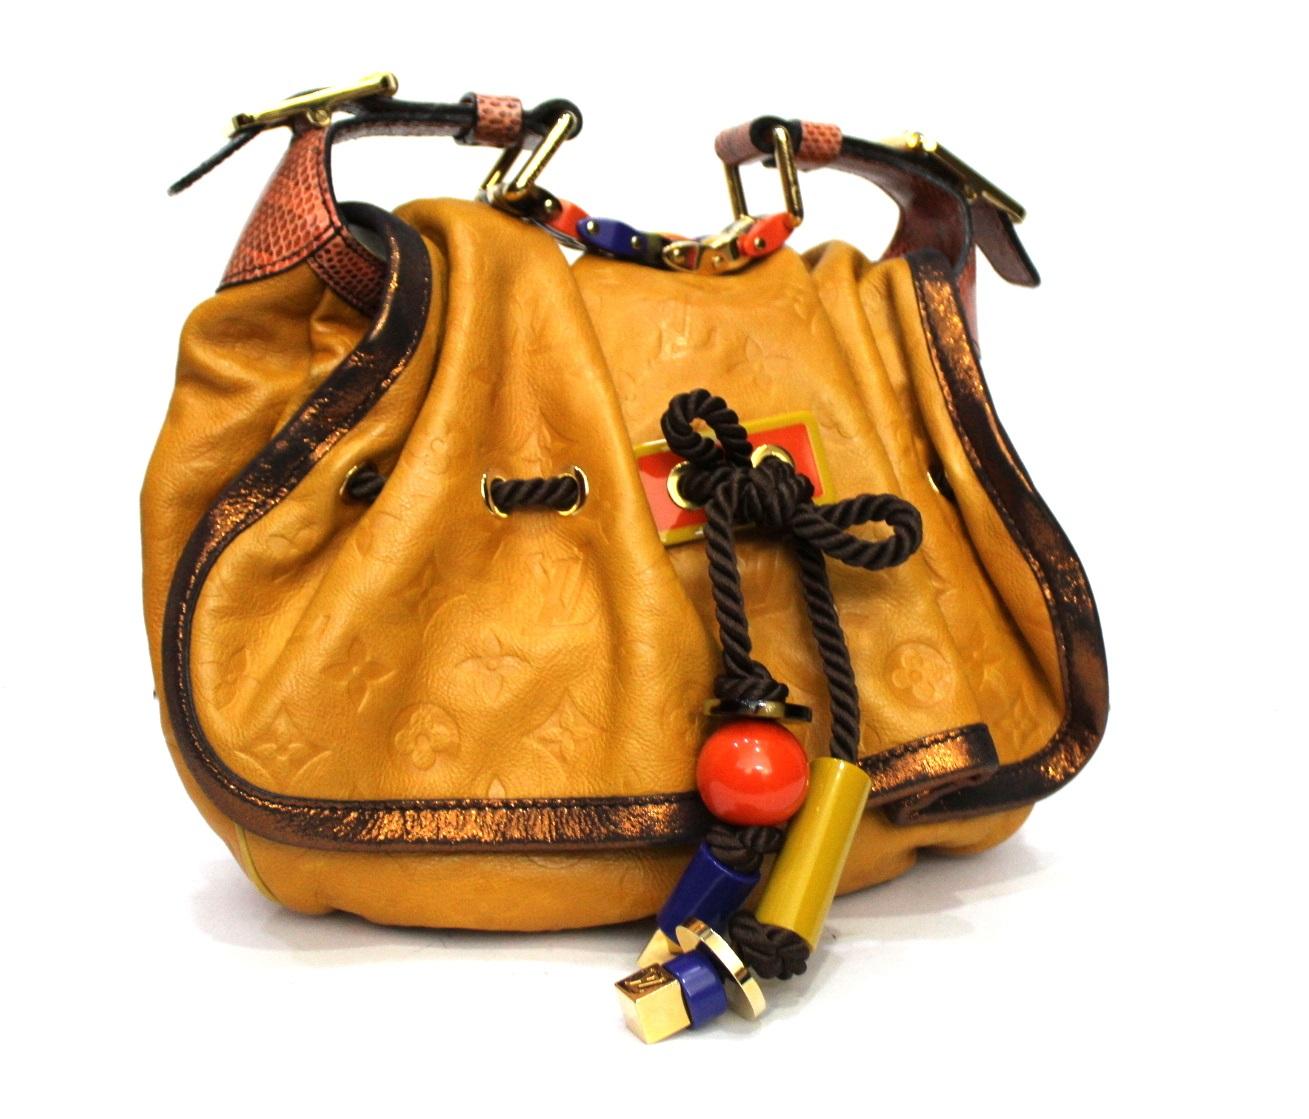 Louis Vuitton Kalahari  Monogram Pm Limited Edition, made of soft yellowleather full of colorful details. Equipped with a handle to wear it on the shoulder, flap closure, quite large inside.
Excellent condition, year 2009.